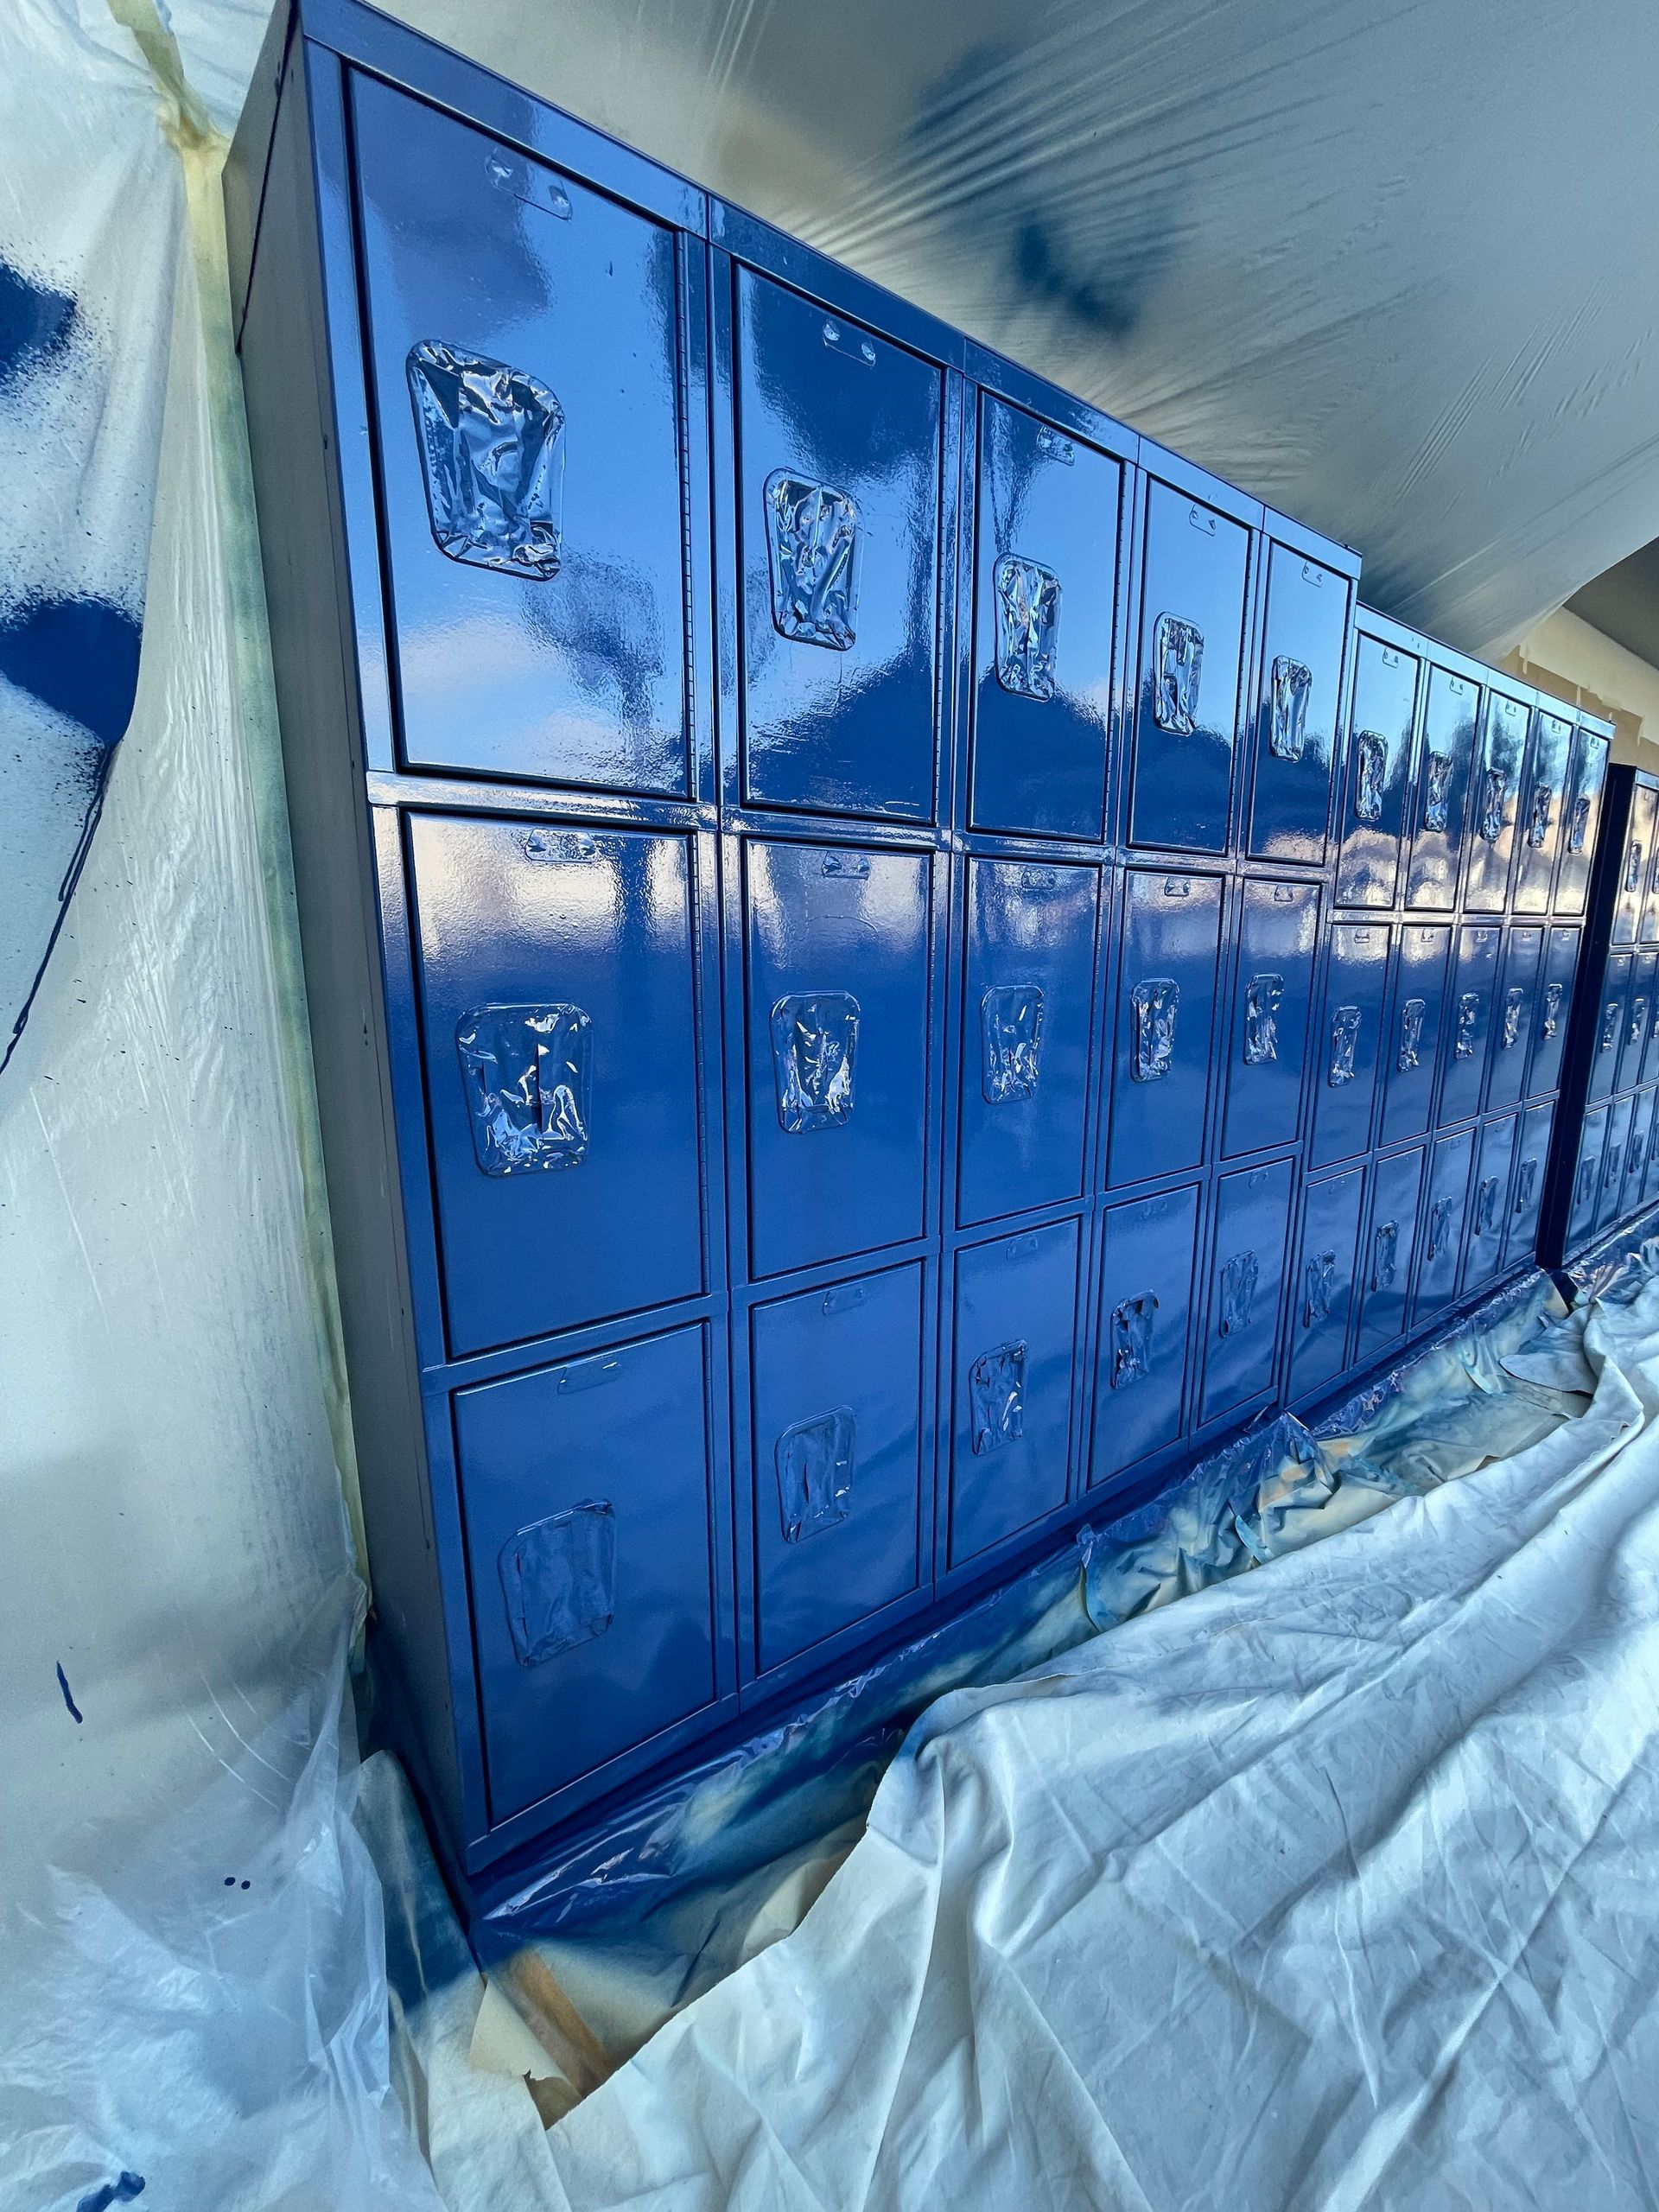 a row of blue lockers are being painted blue